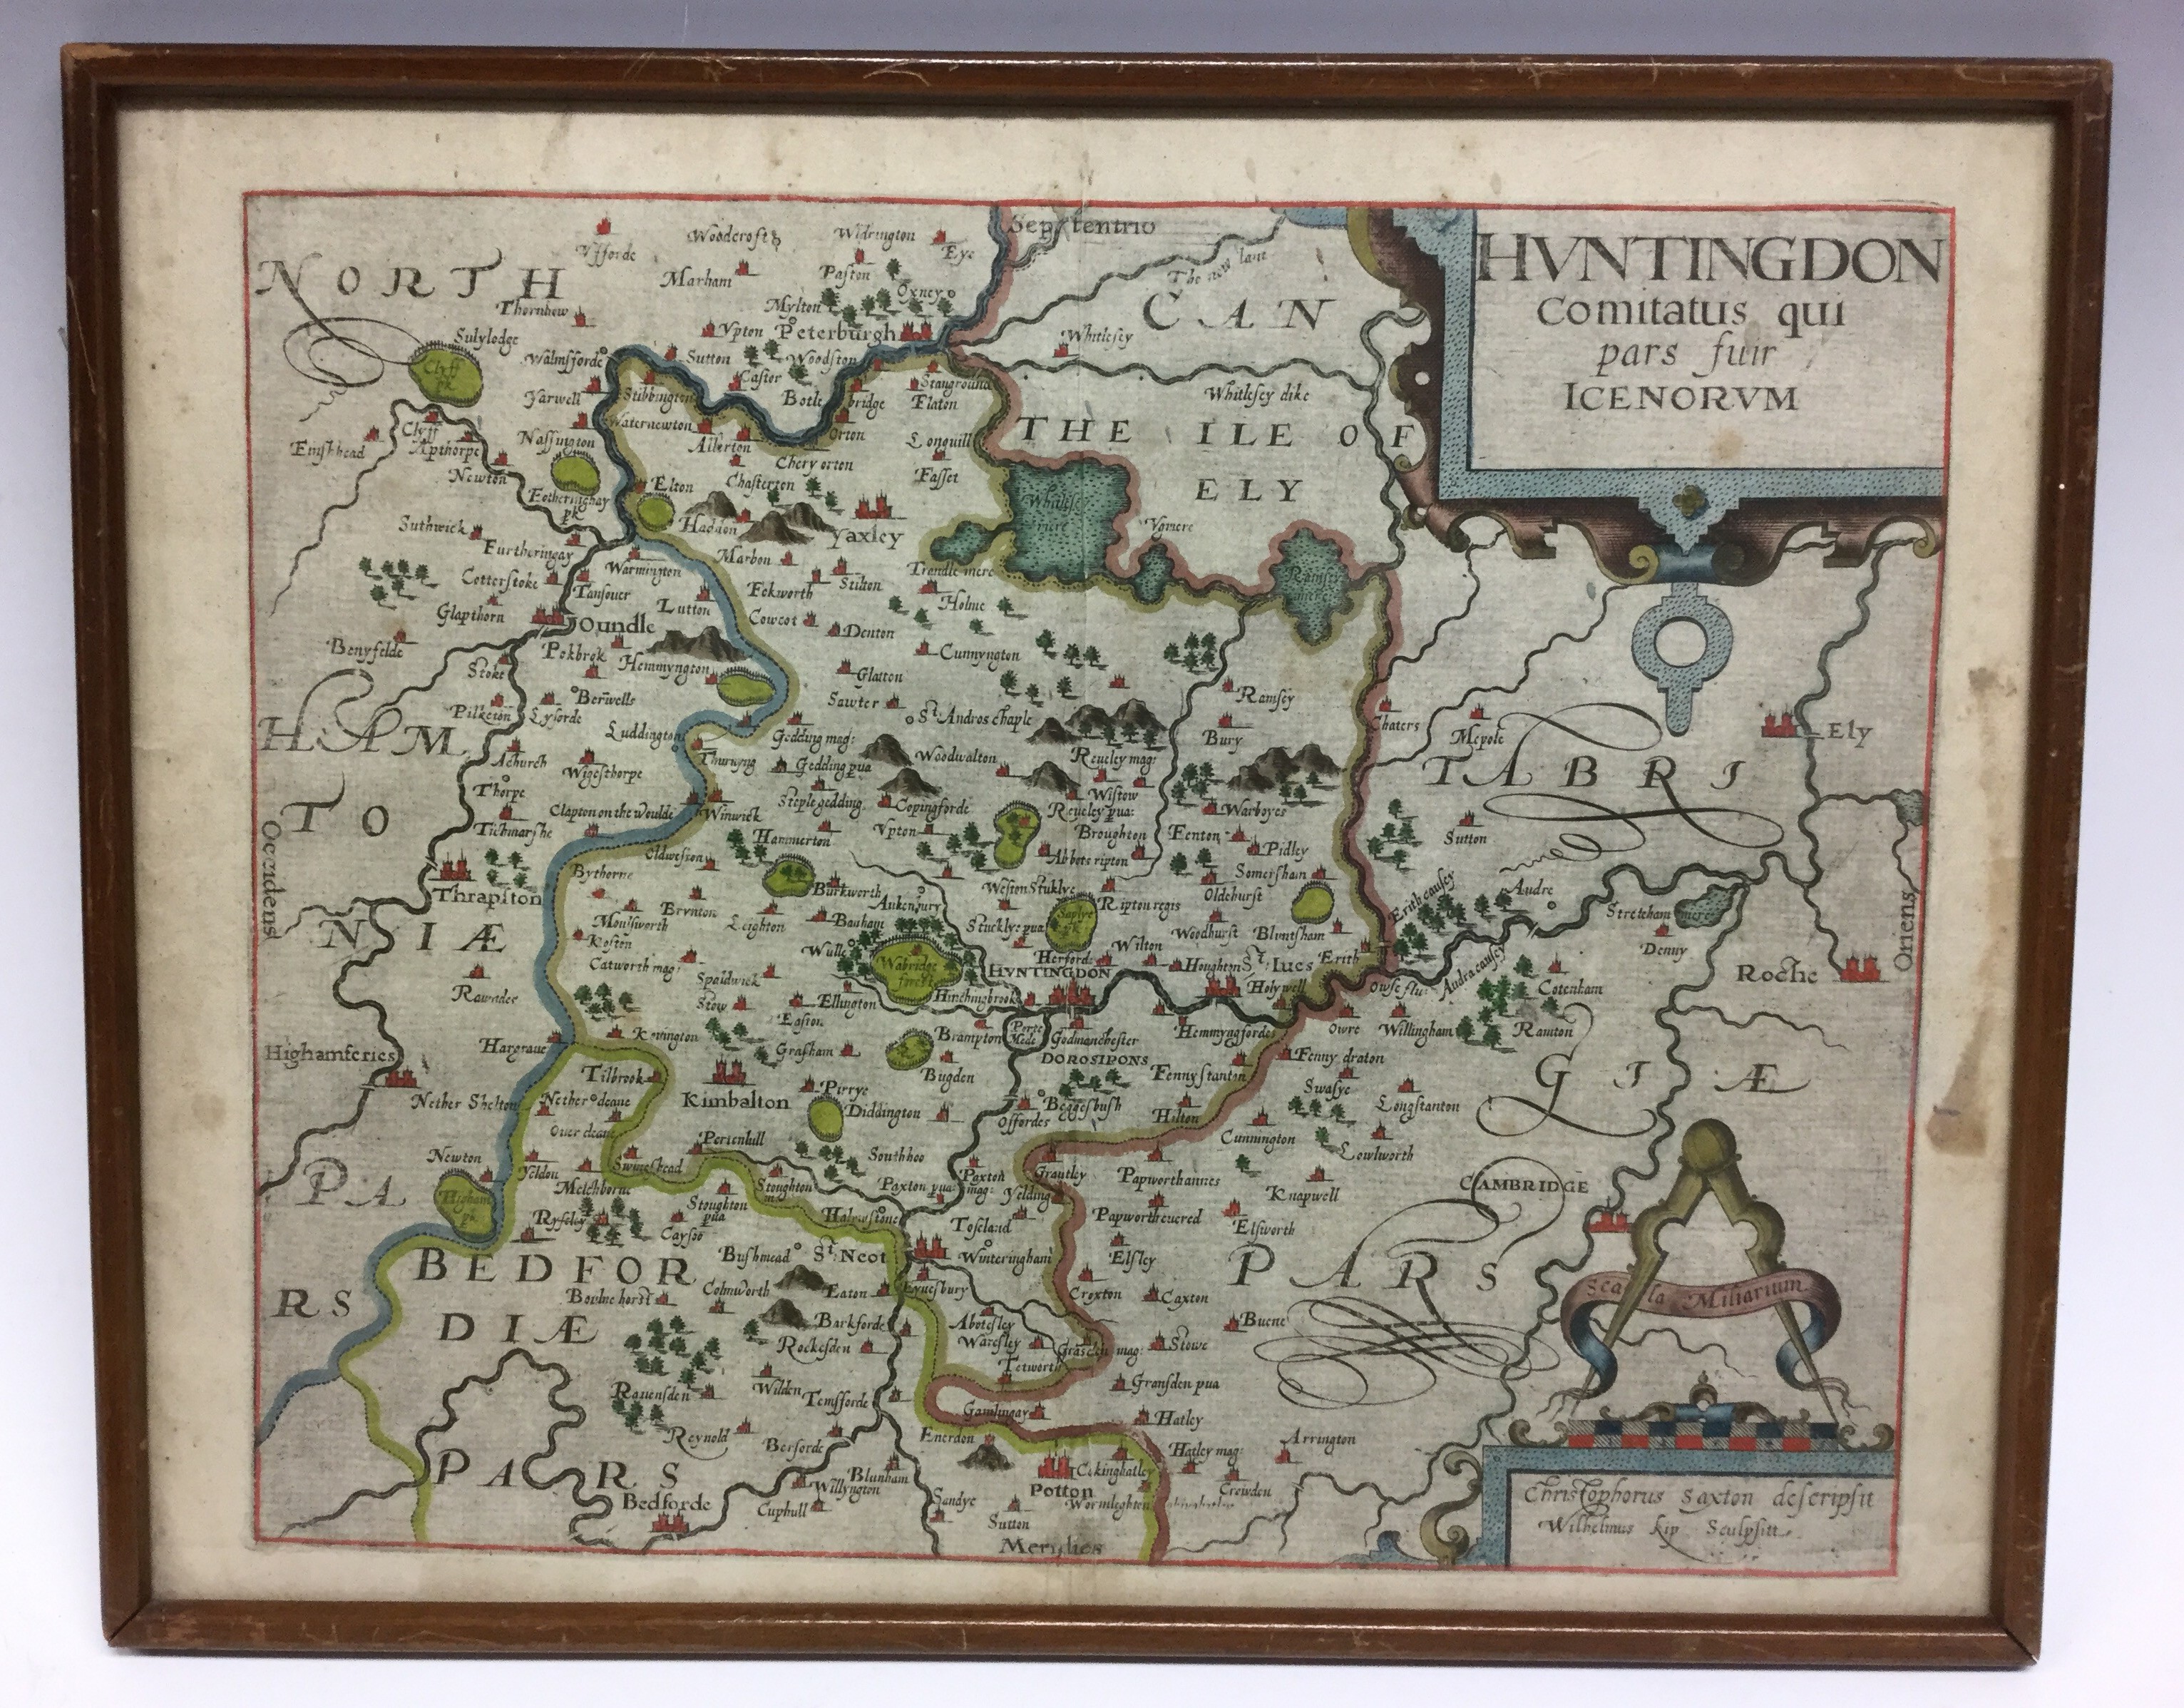 William Kip (1588-1635), after Christopher (1540-1610), map, Huntingdon, hand-coloured engraving,